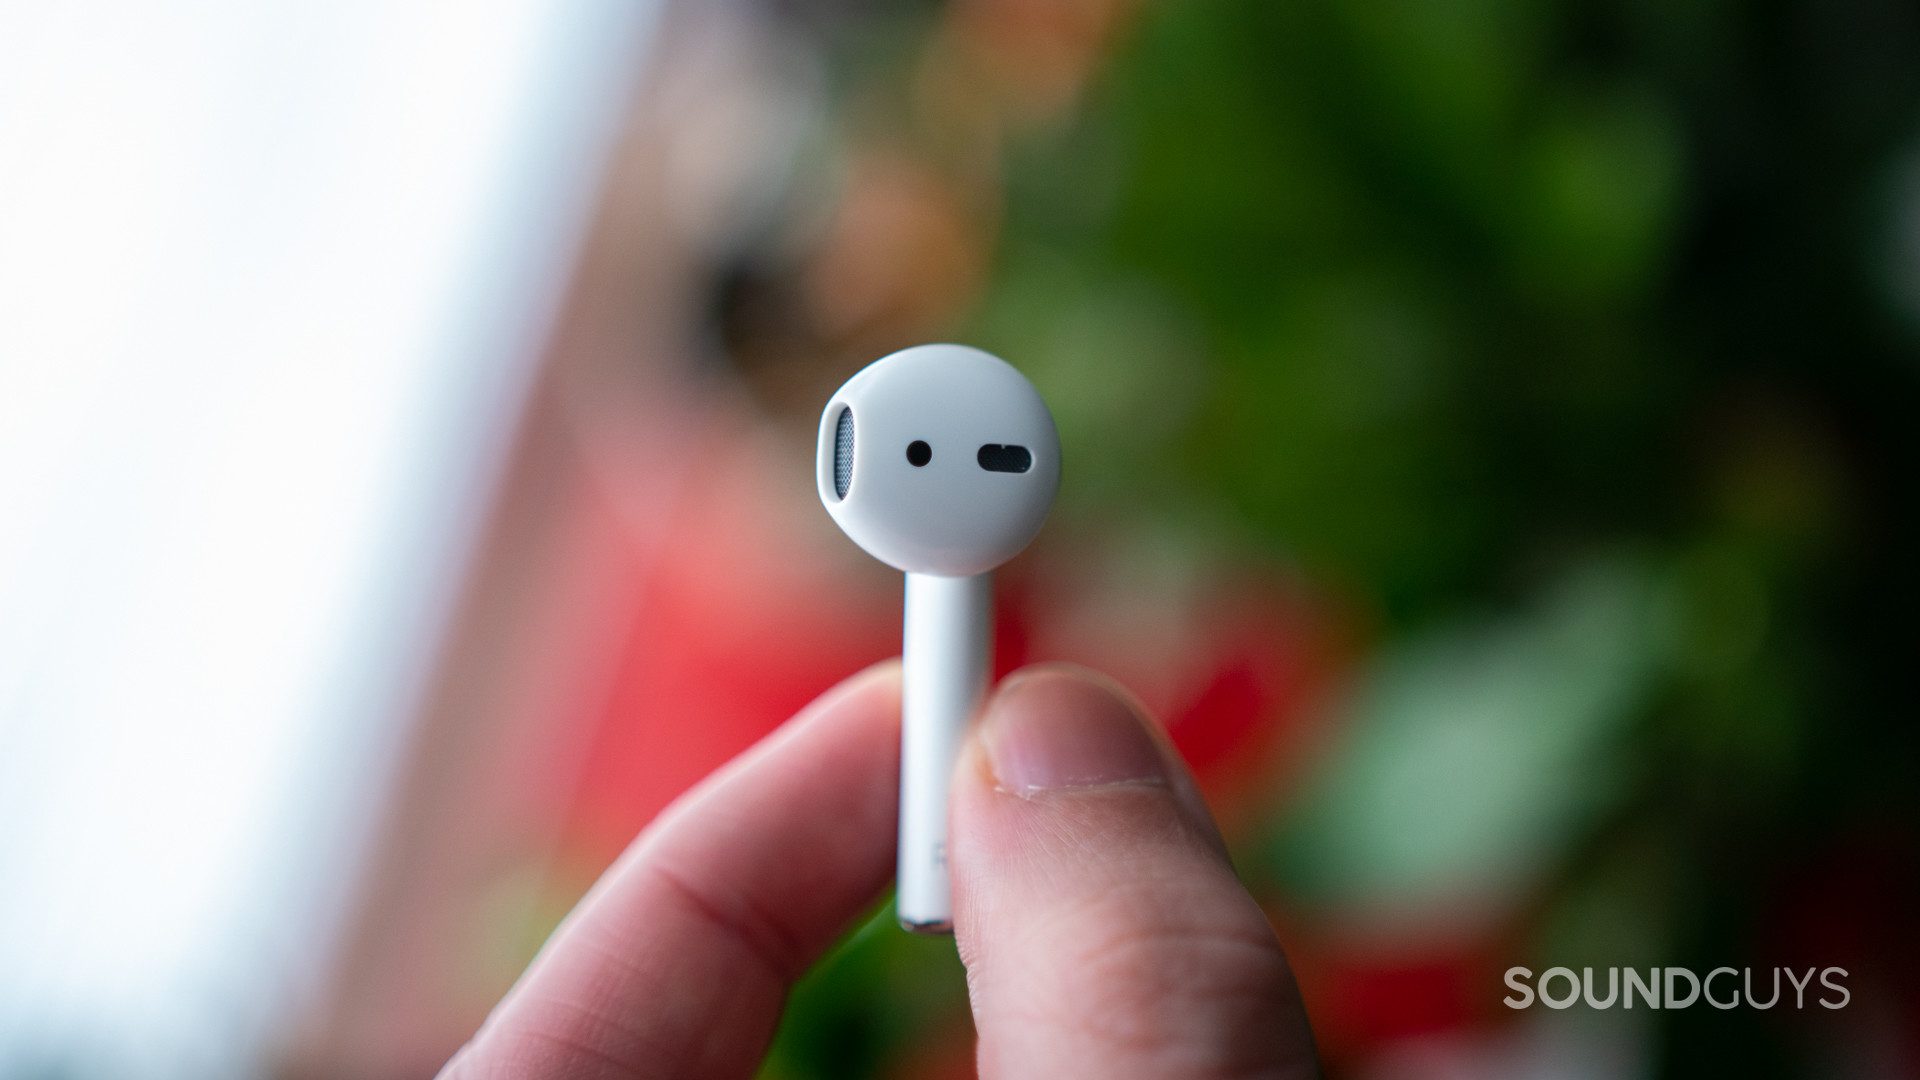 A single earphone of the Apple AirPods (2nd generation).